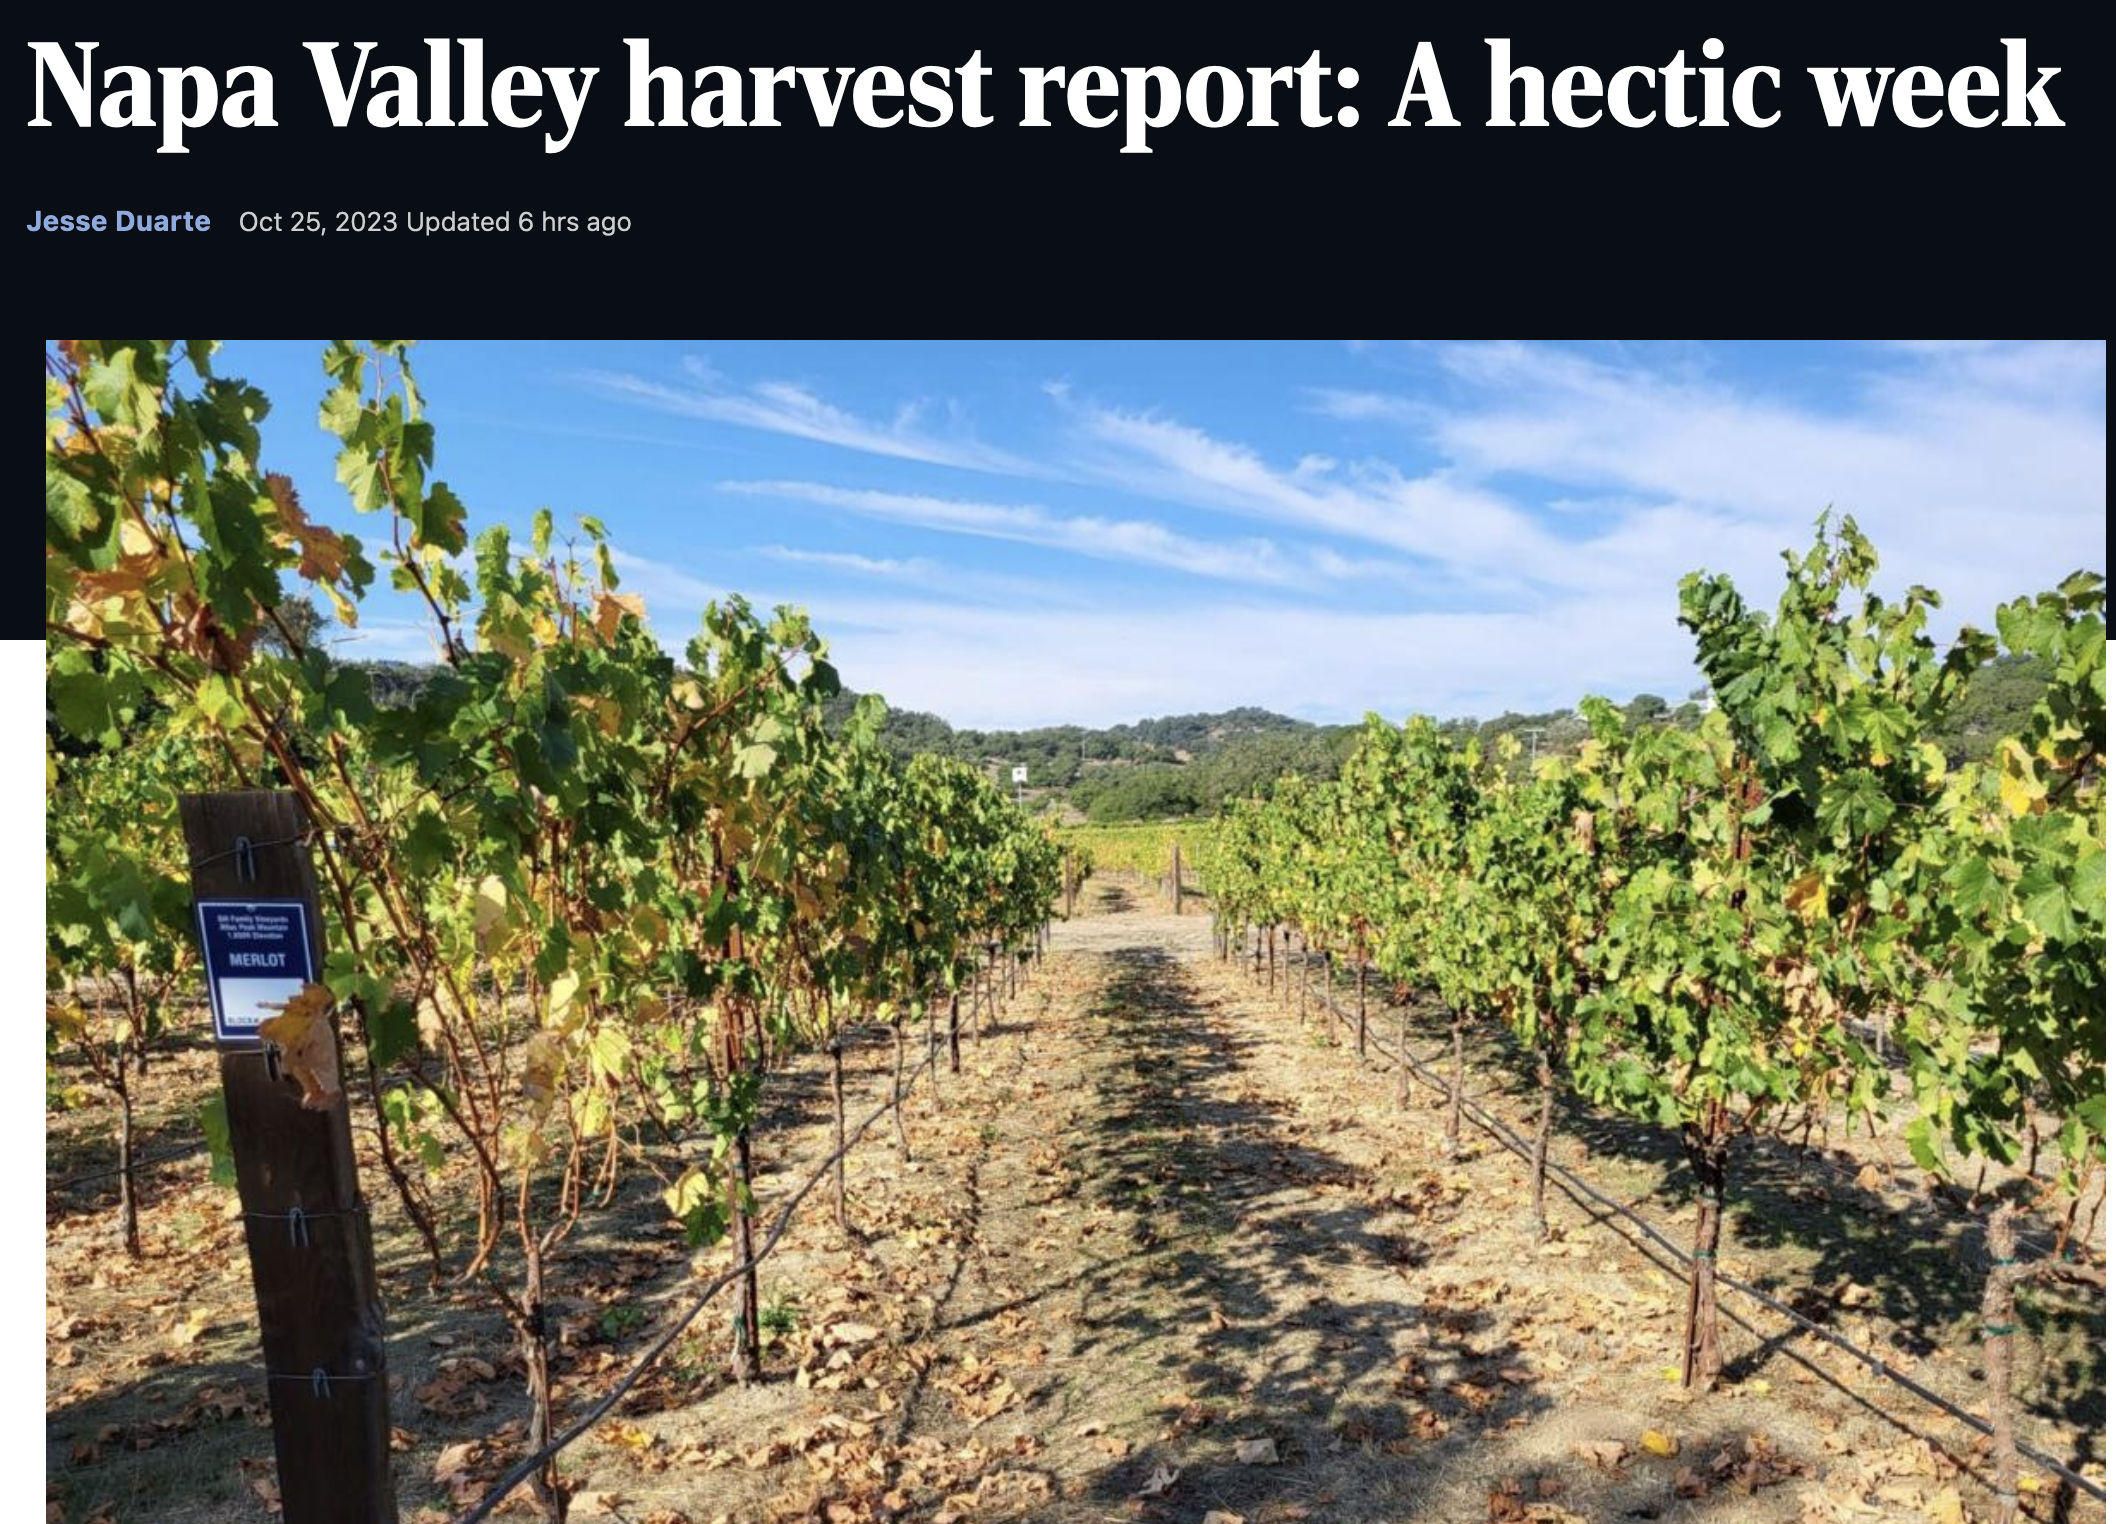 Napa Valley harvest report: A hectic week